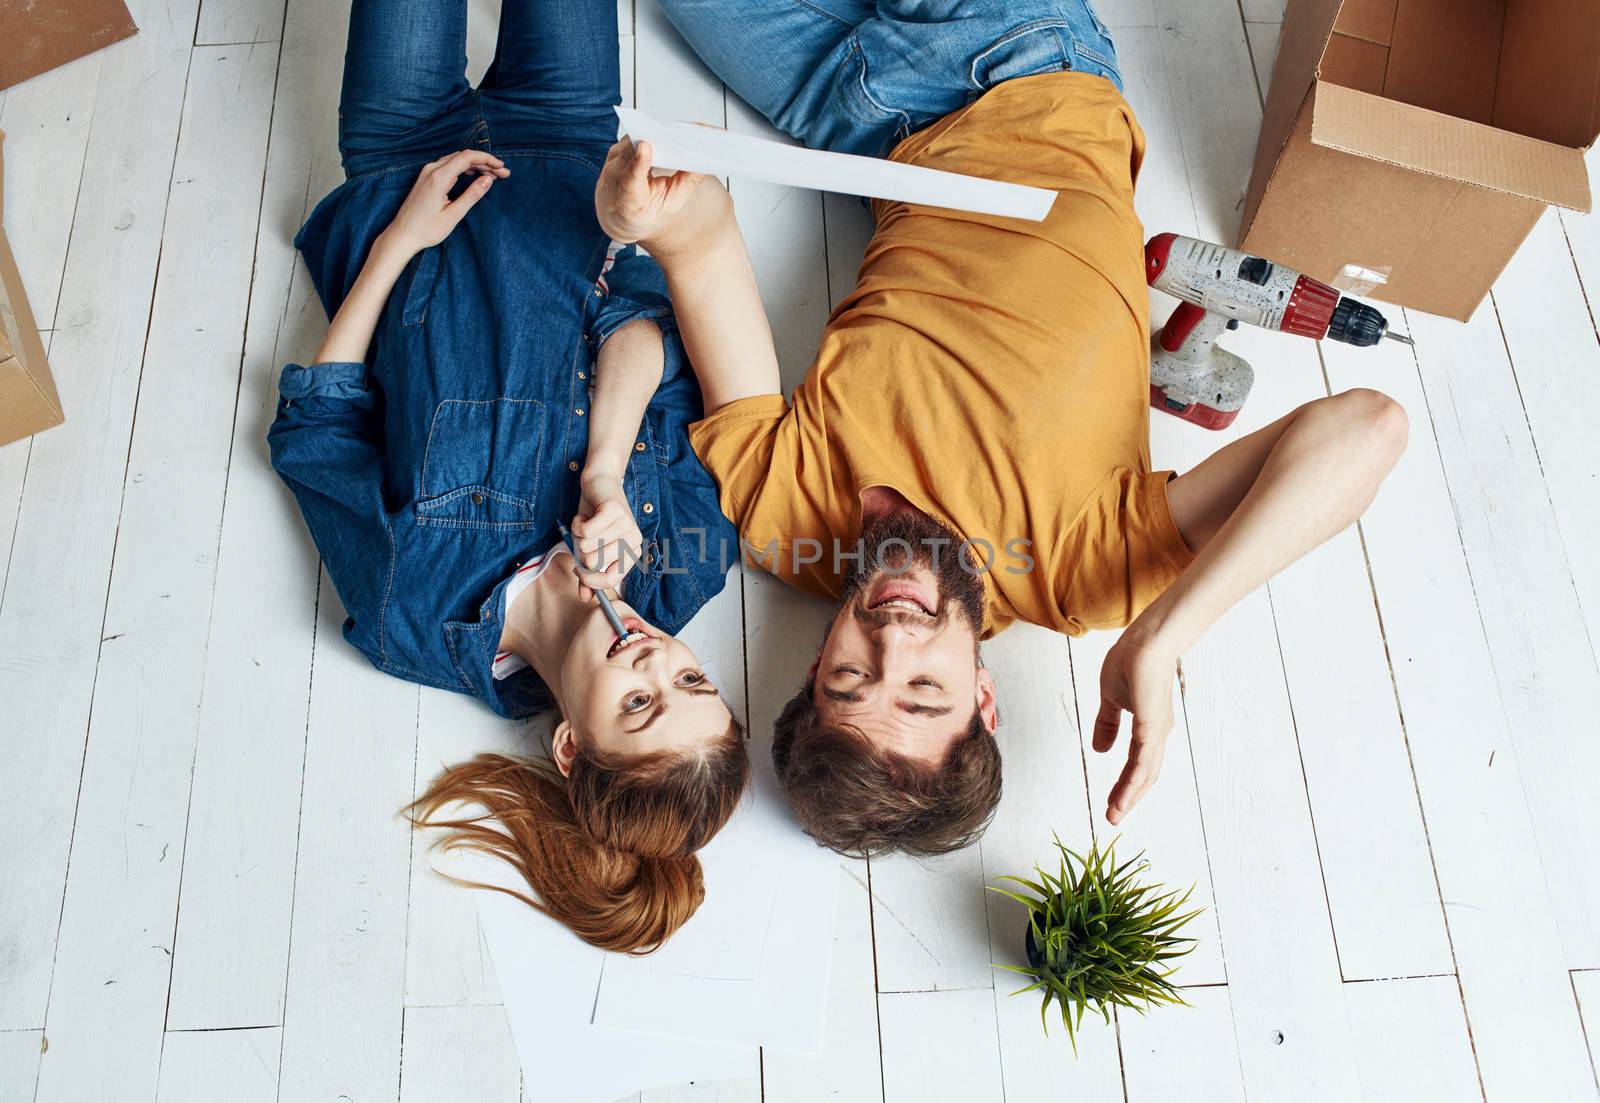 Man and woman with boxes on the floor a flower in a pot moving to repair work. High quality photo